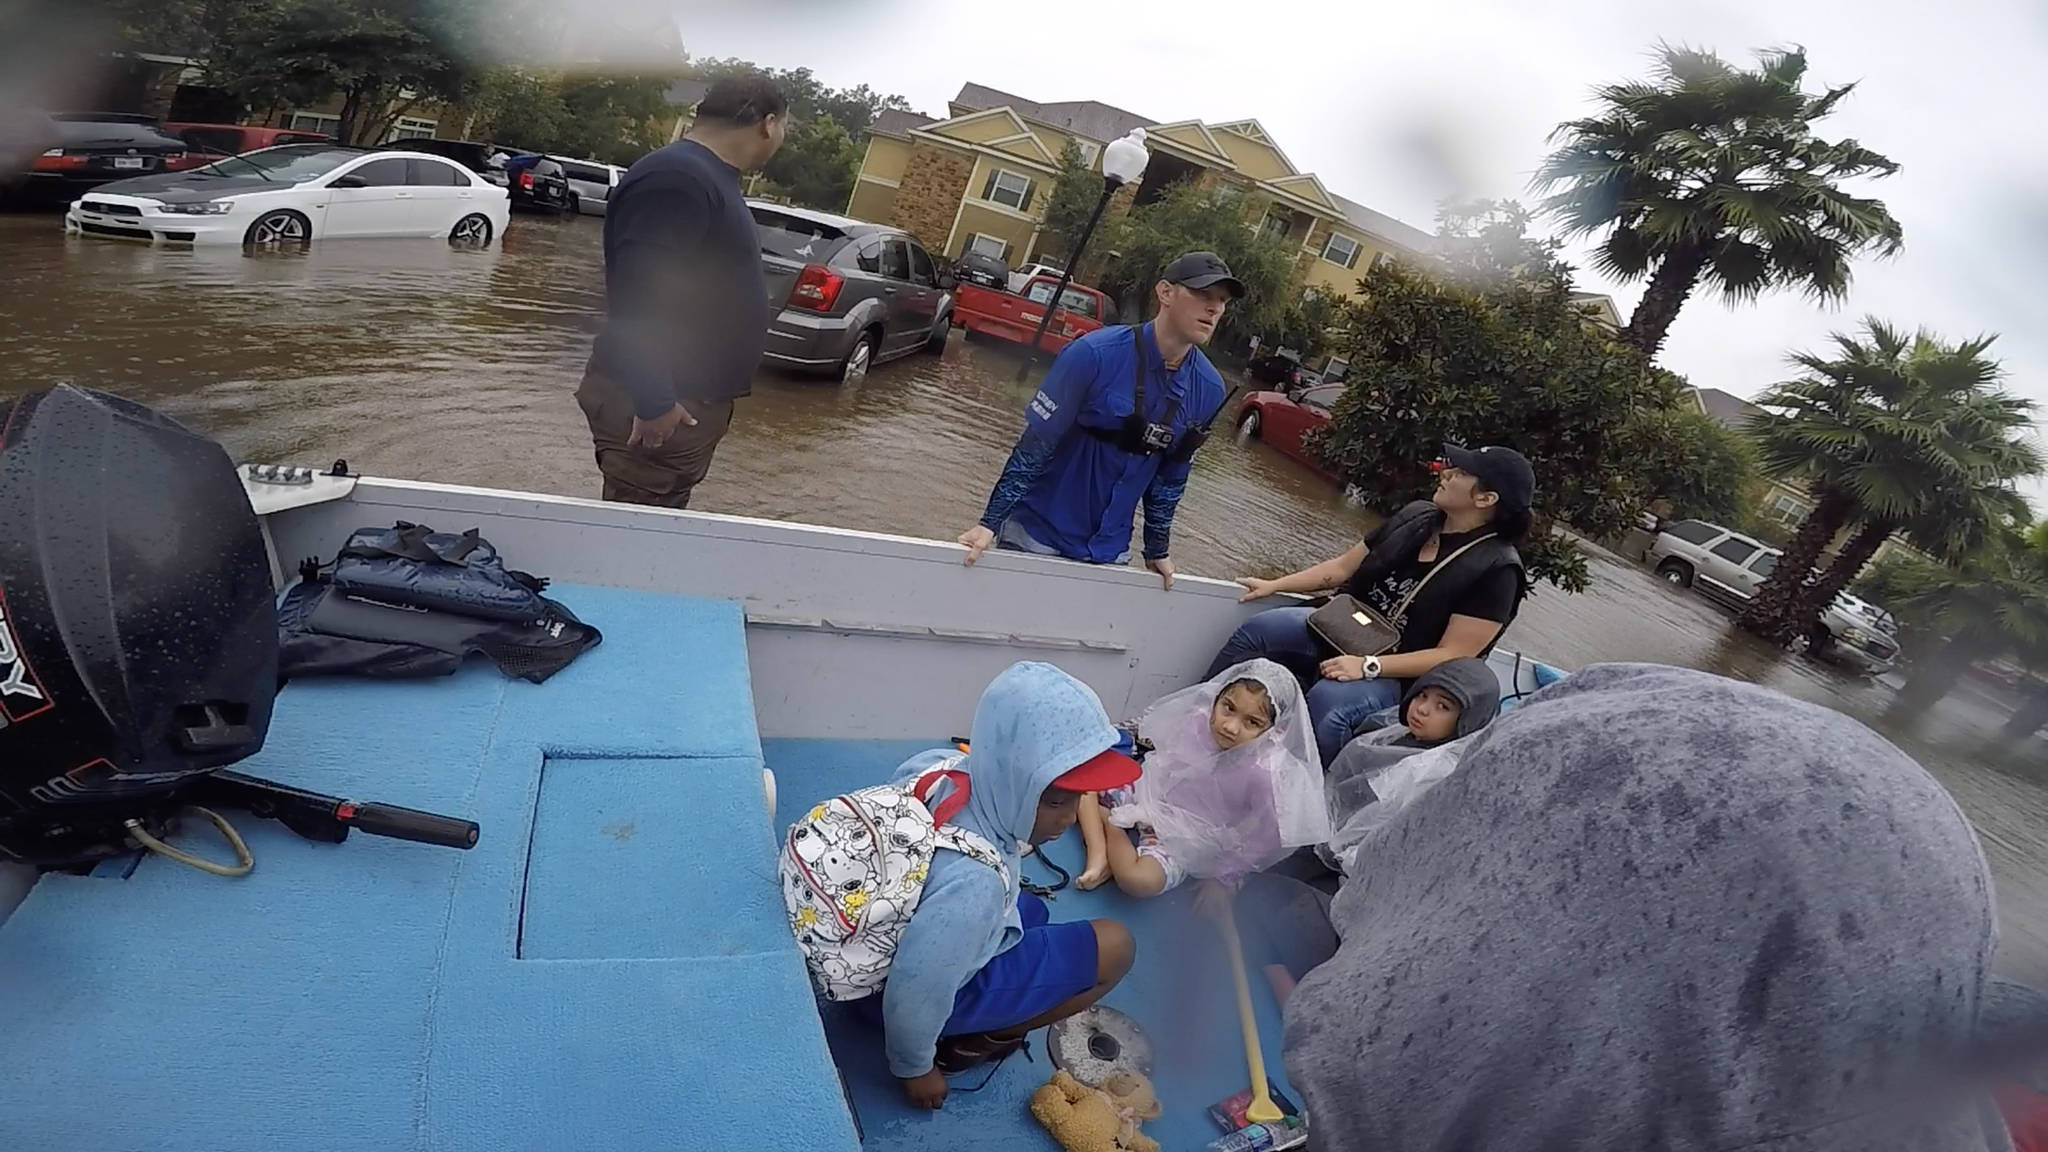 Former Anchor Point resident Chase McKinney, in blue shirt, helps rescue Houston-area flood survivors Aug. 28-30, 2017 in Texas. McKinney and a friend, Israel Lopez, picked up stranded victims and helped get them to high ground in their bass boat. (Photo provided)